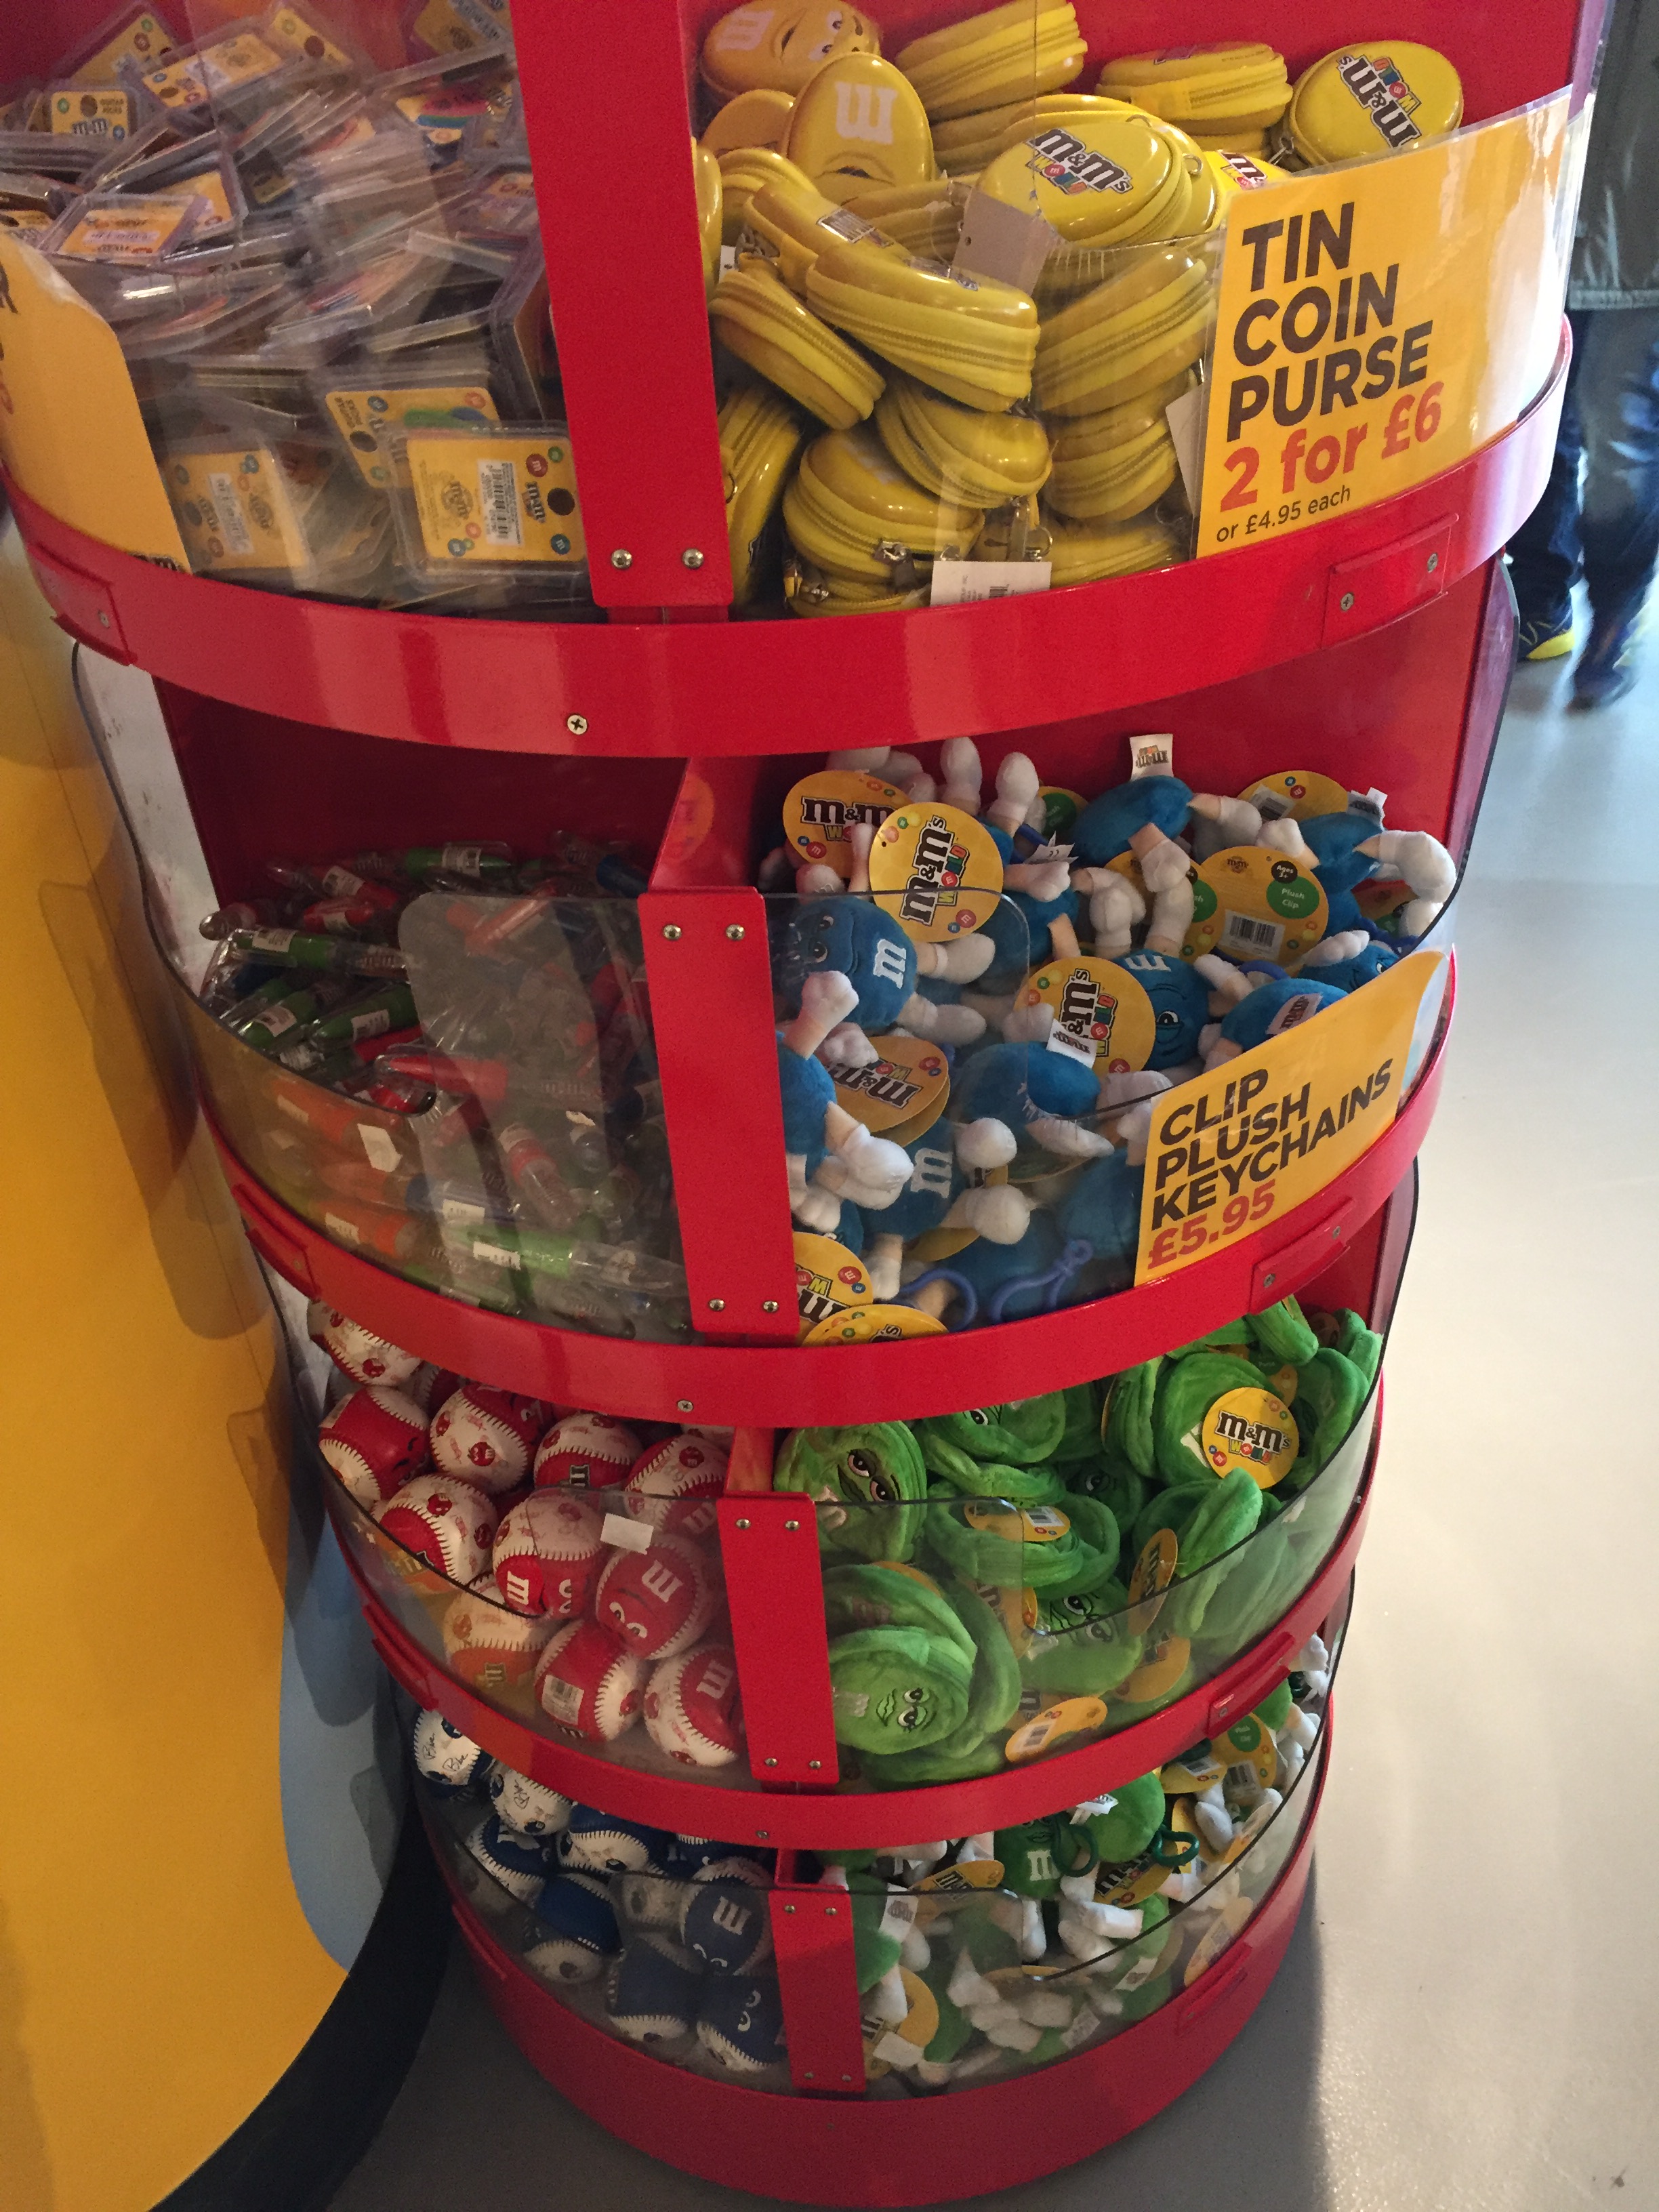 Various items of M&M's branded merchandise, including guitar picks, tin coin purses and plush keychains